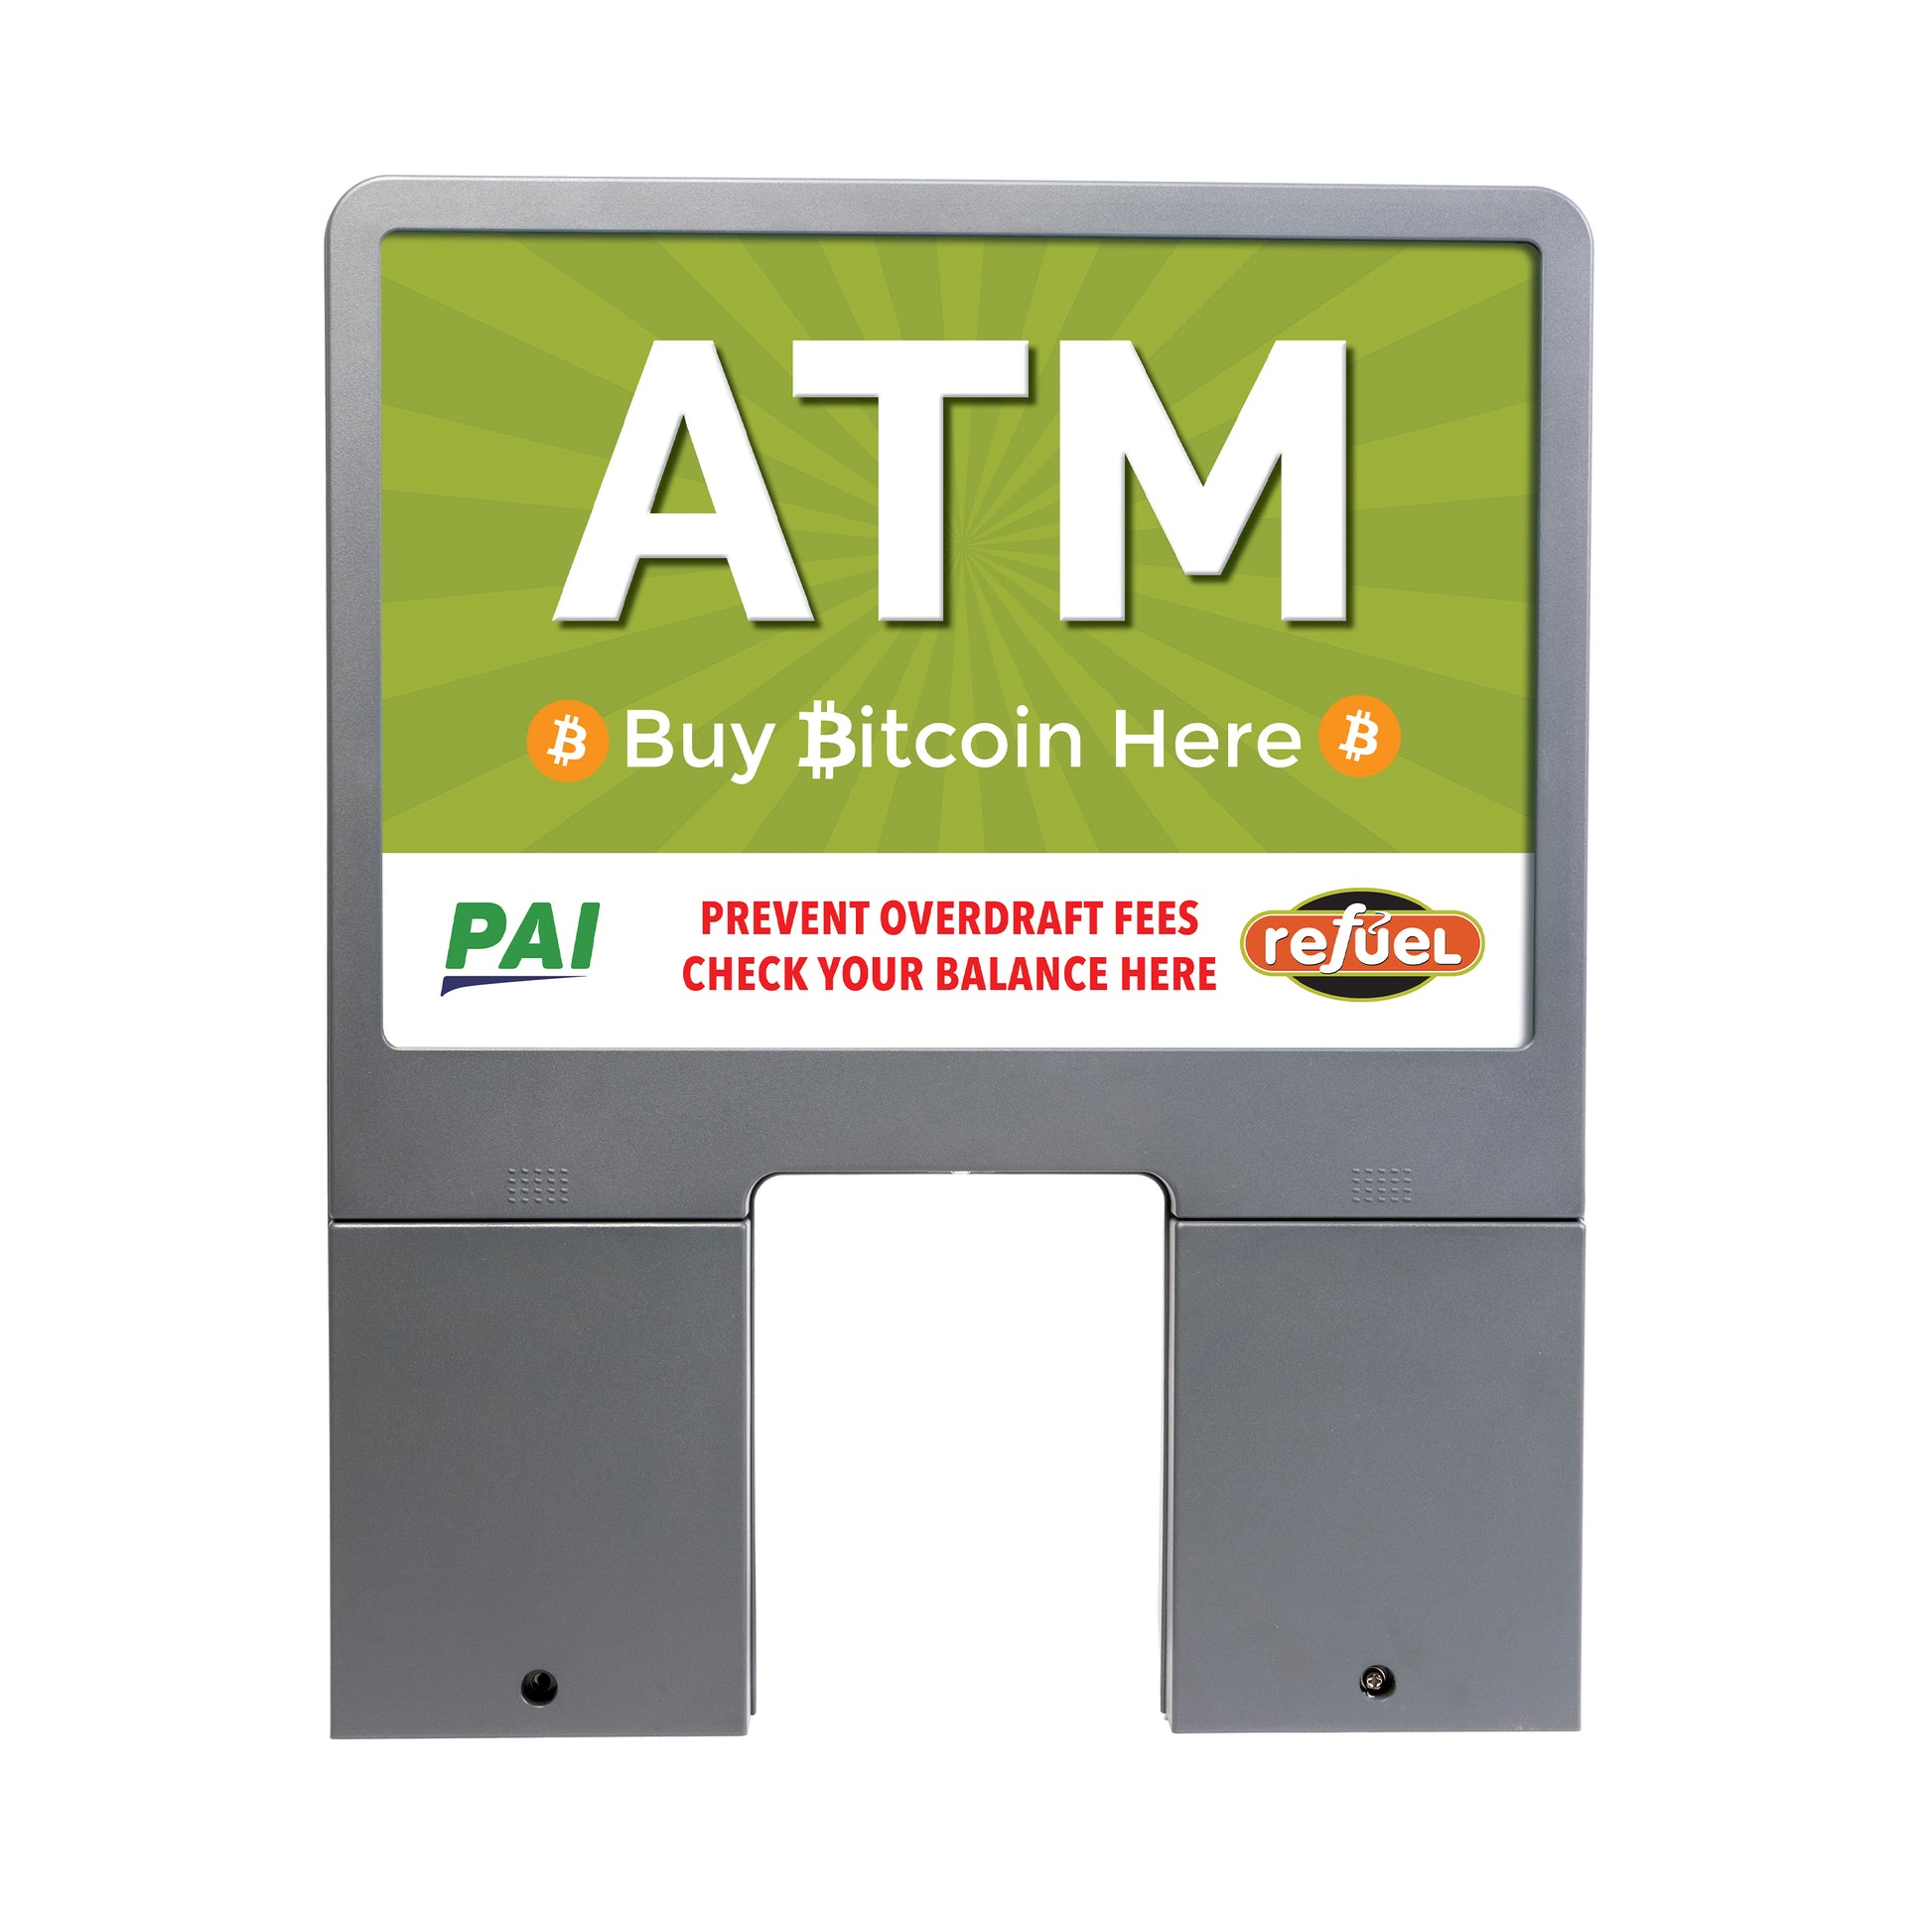 Genmega M ATM Topper Insert with CollorBrillance™ Printing Technology: Customizable Branding Solution